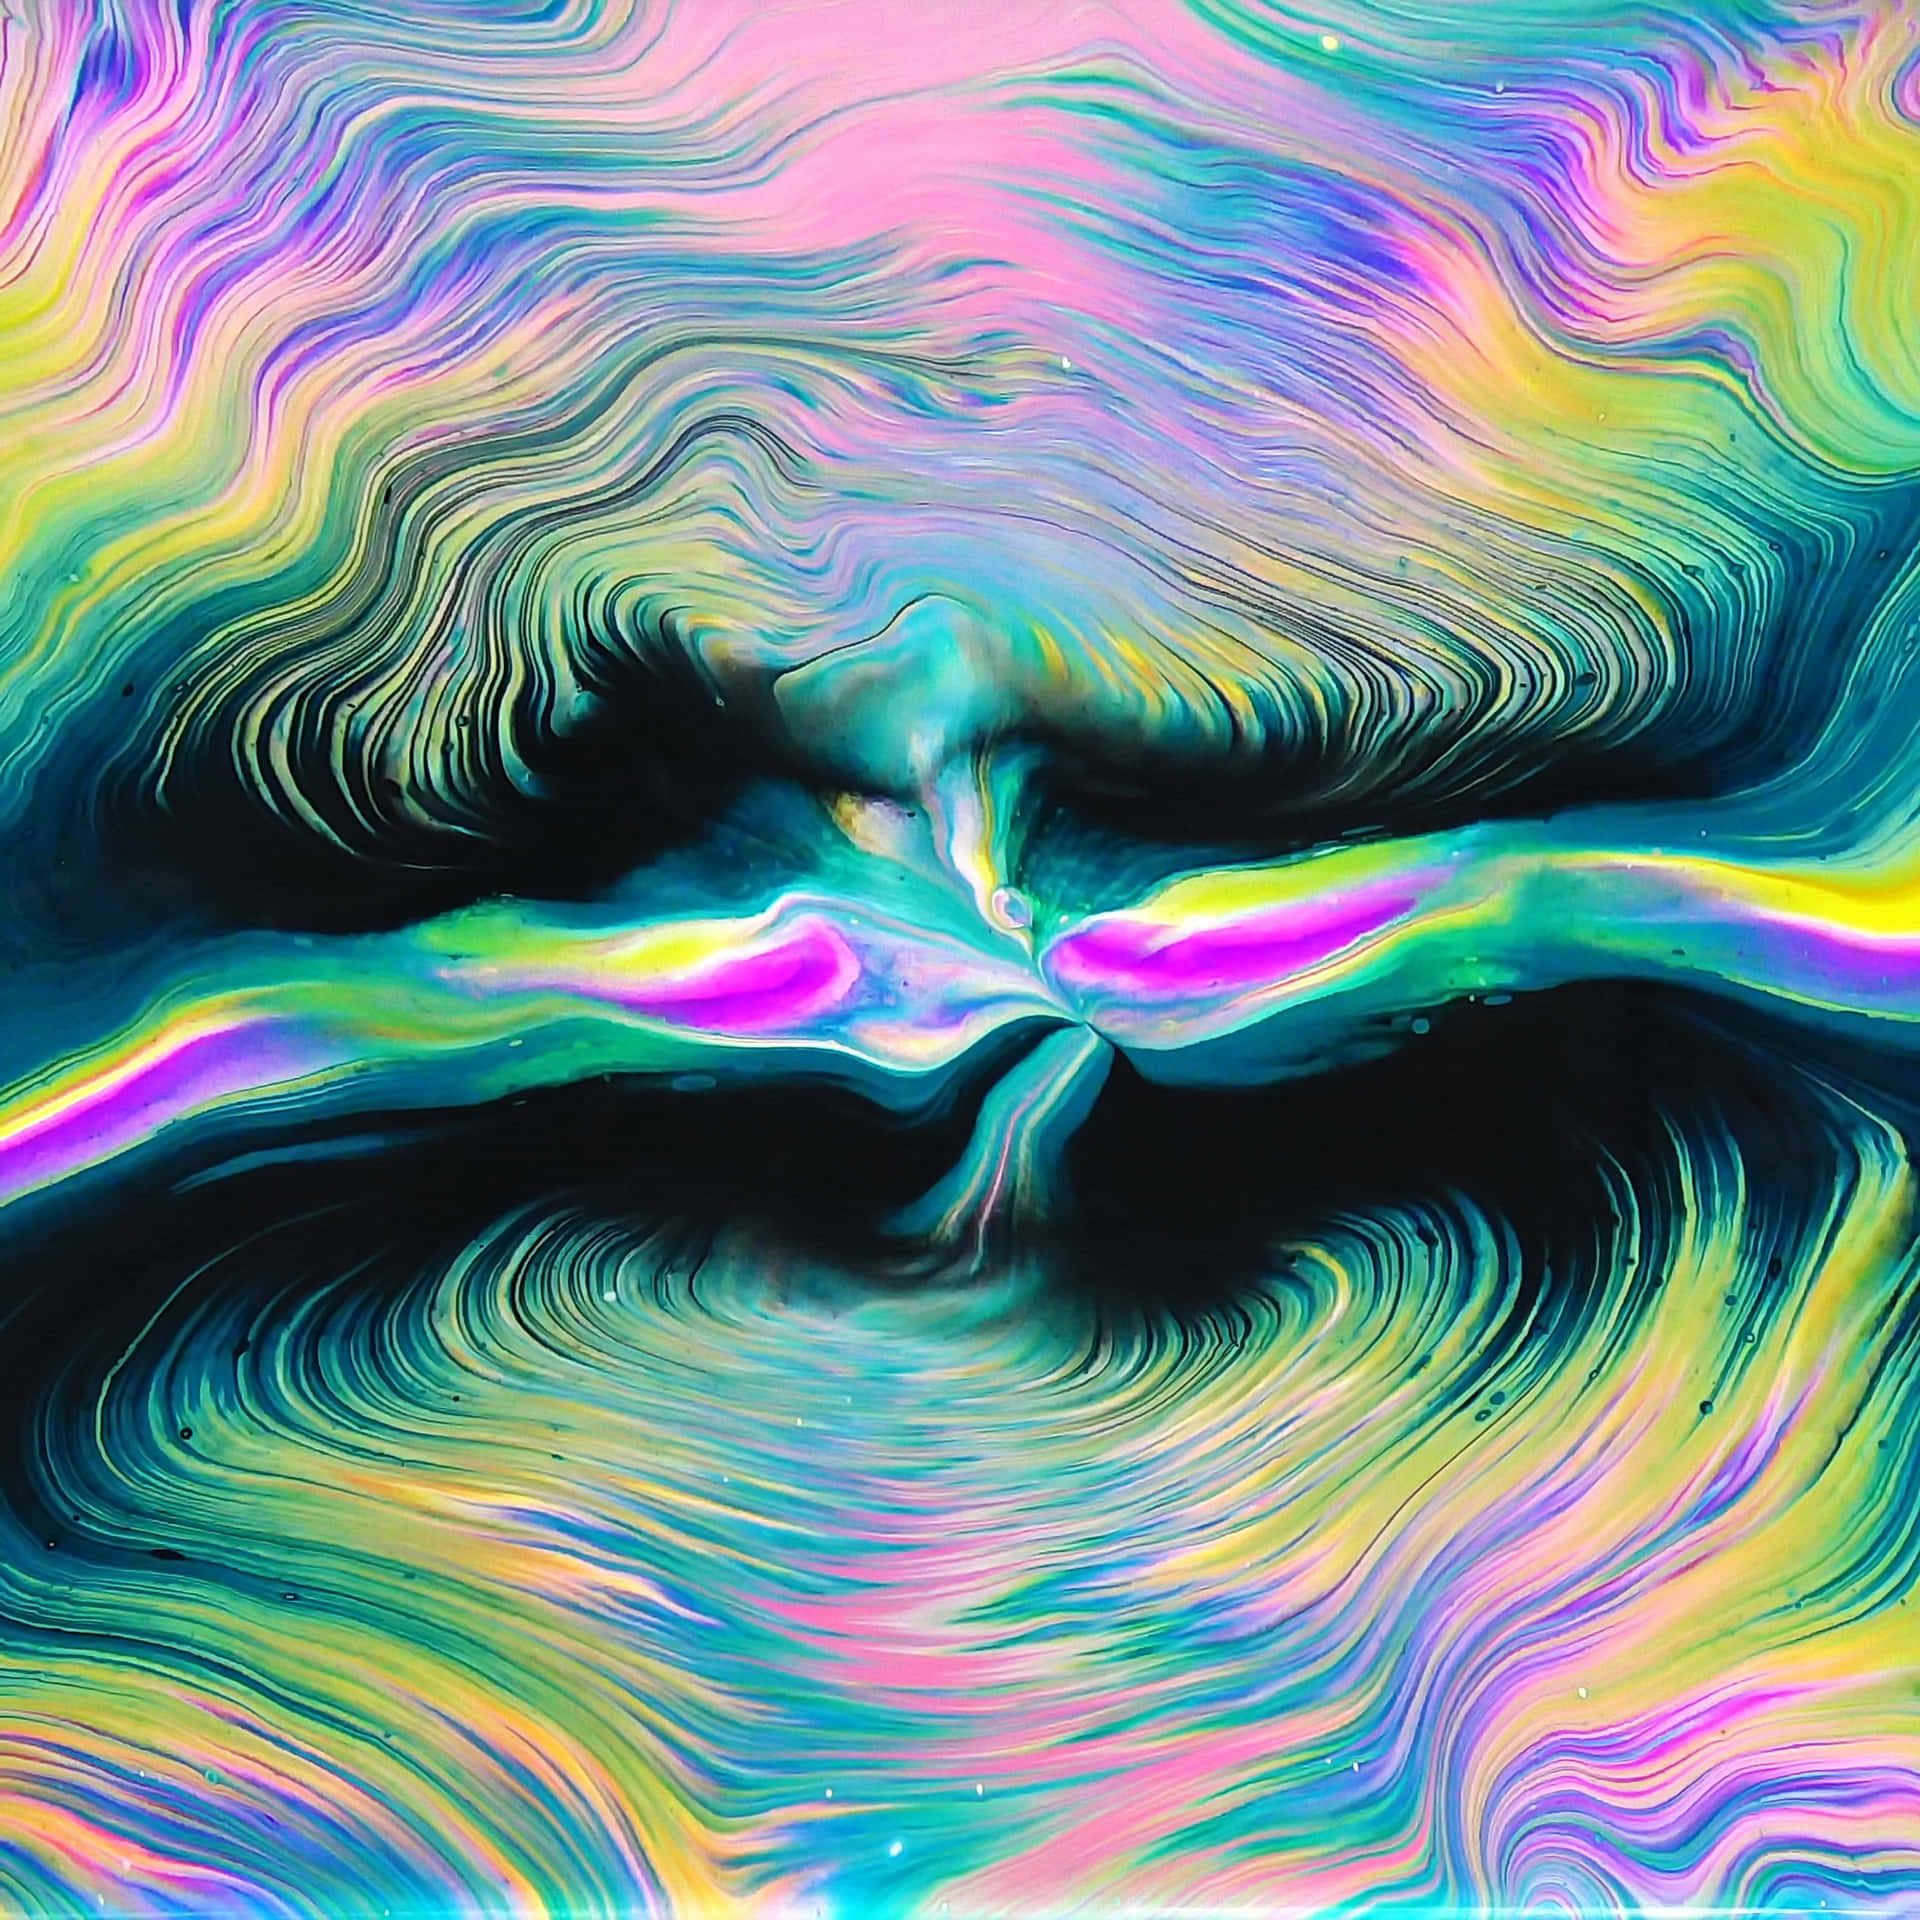 28 Psychedelic QHD wallpapers that will make your background explode with  color